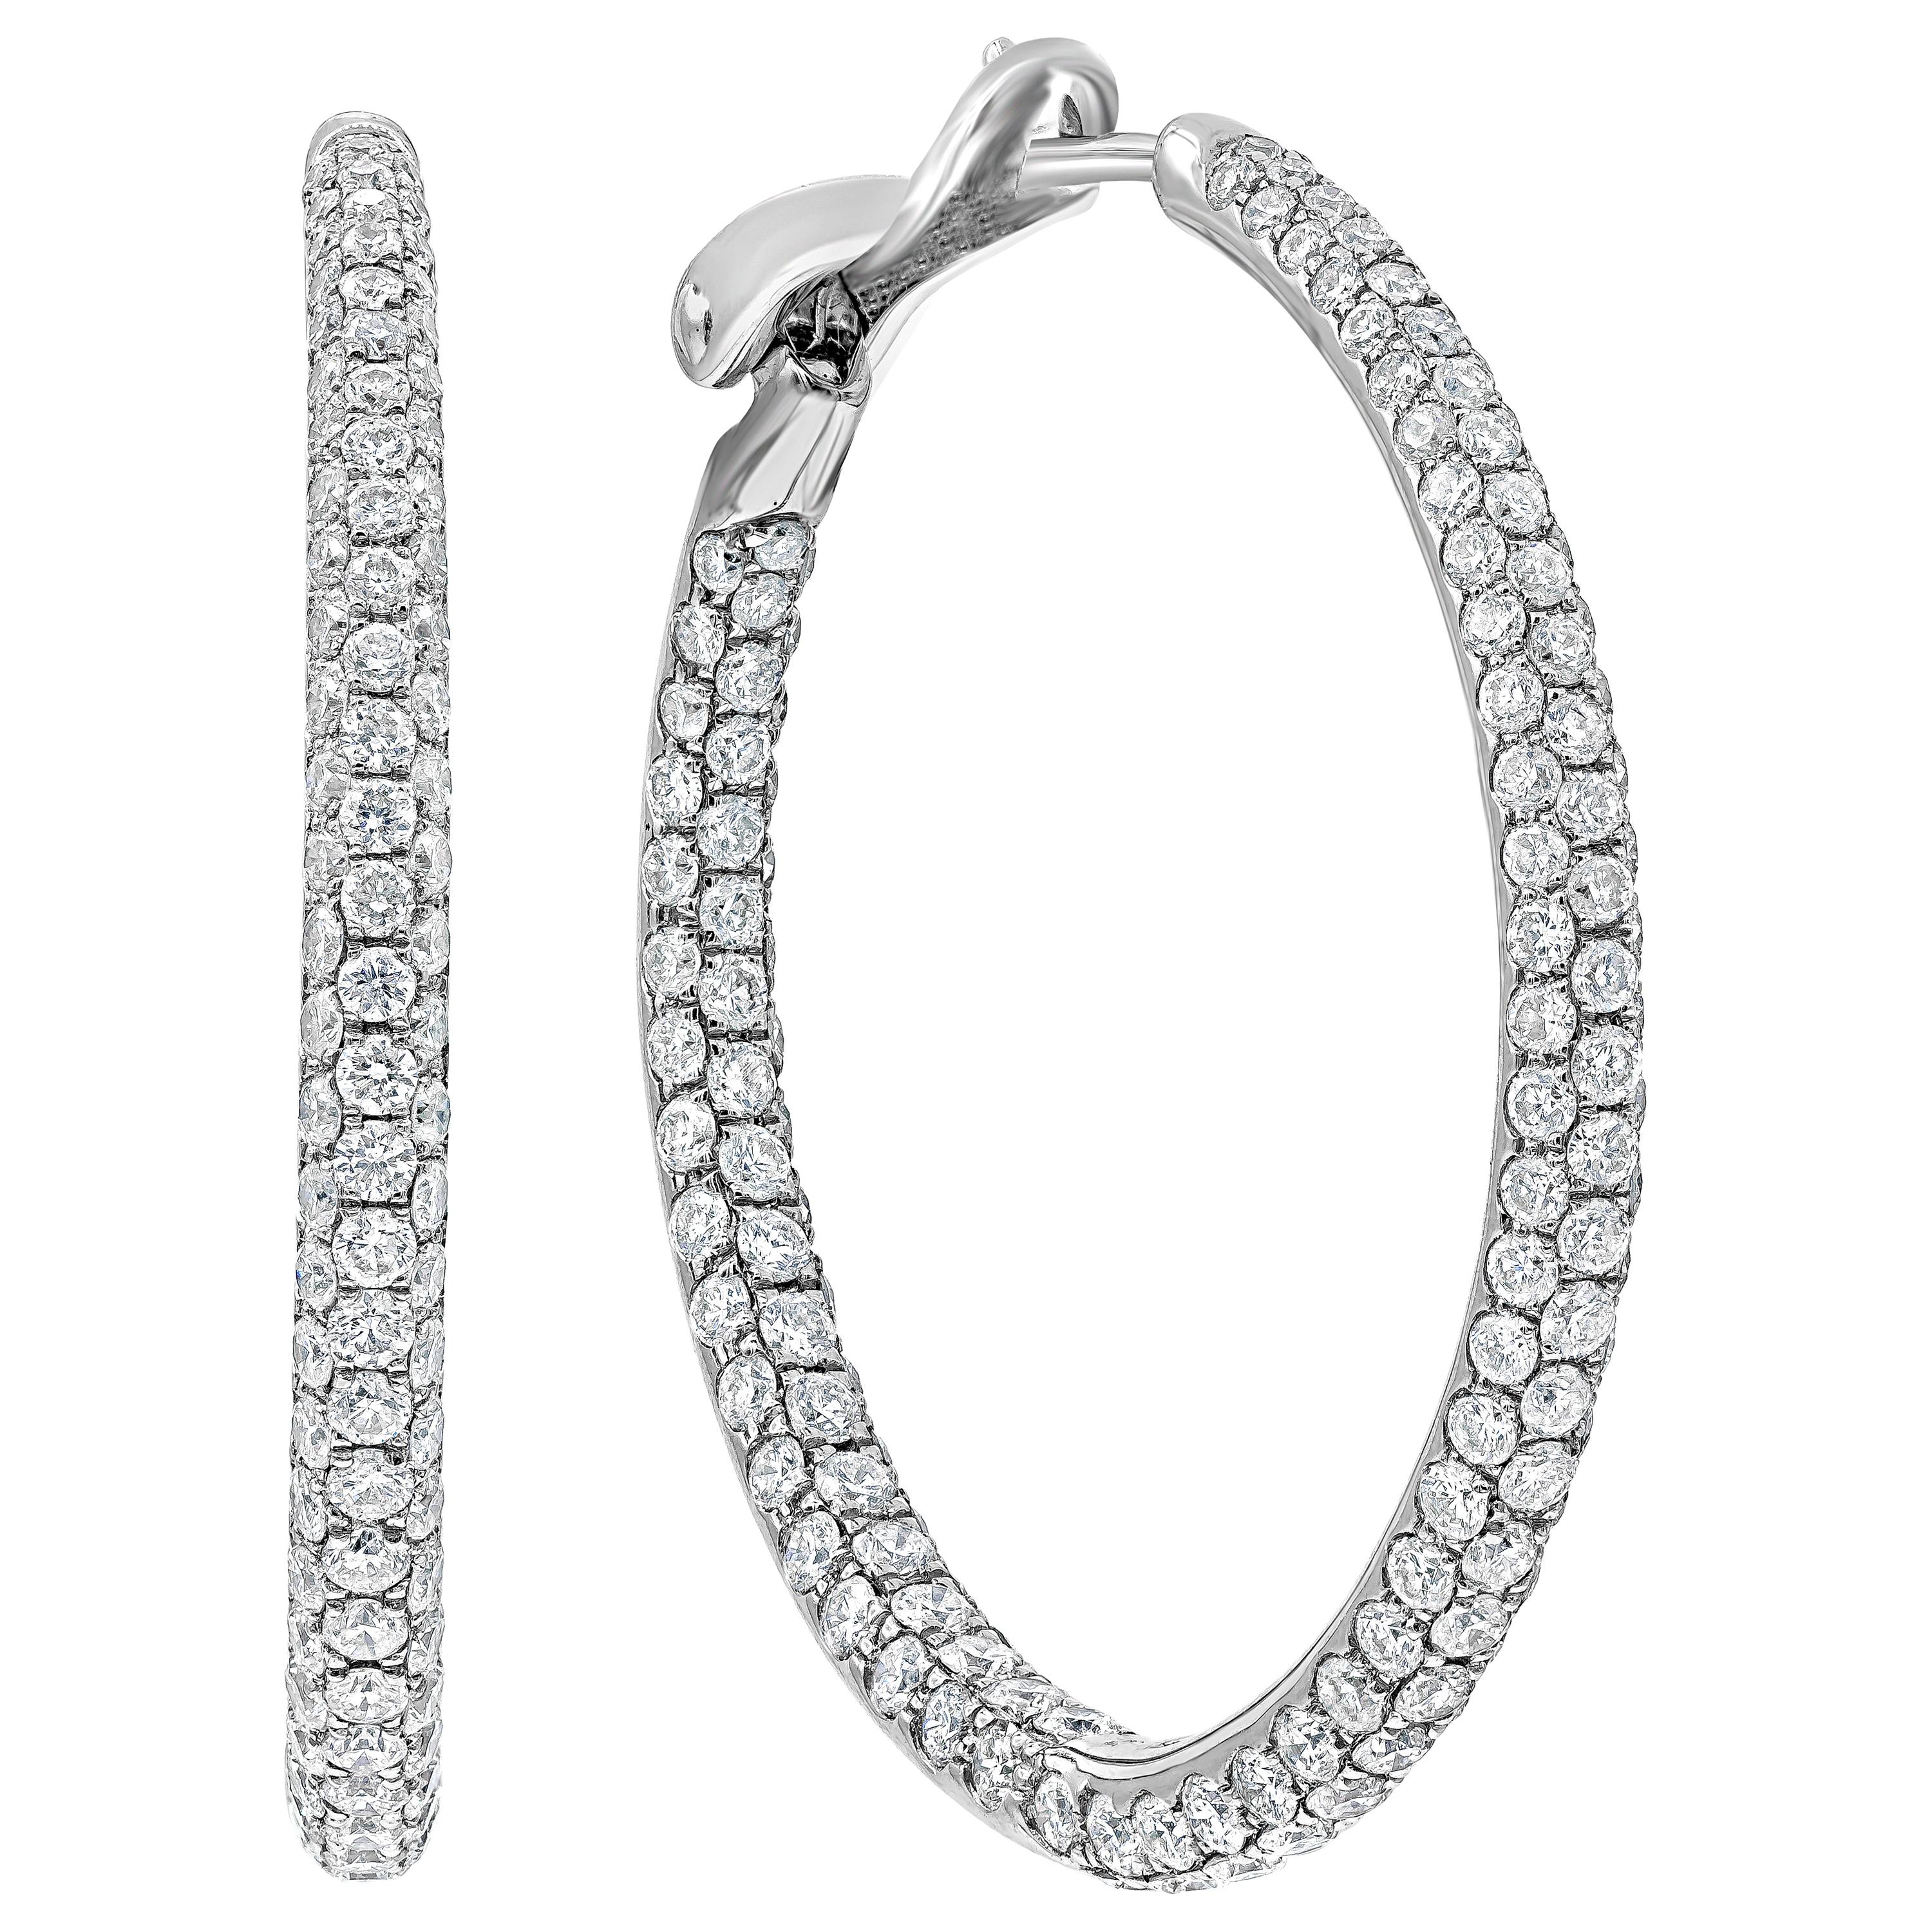 Roman Malakov 2.61 Carats Total Brilliant Round Diamond Micro-Pave Hoop Earrings For Sale